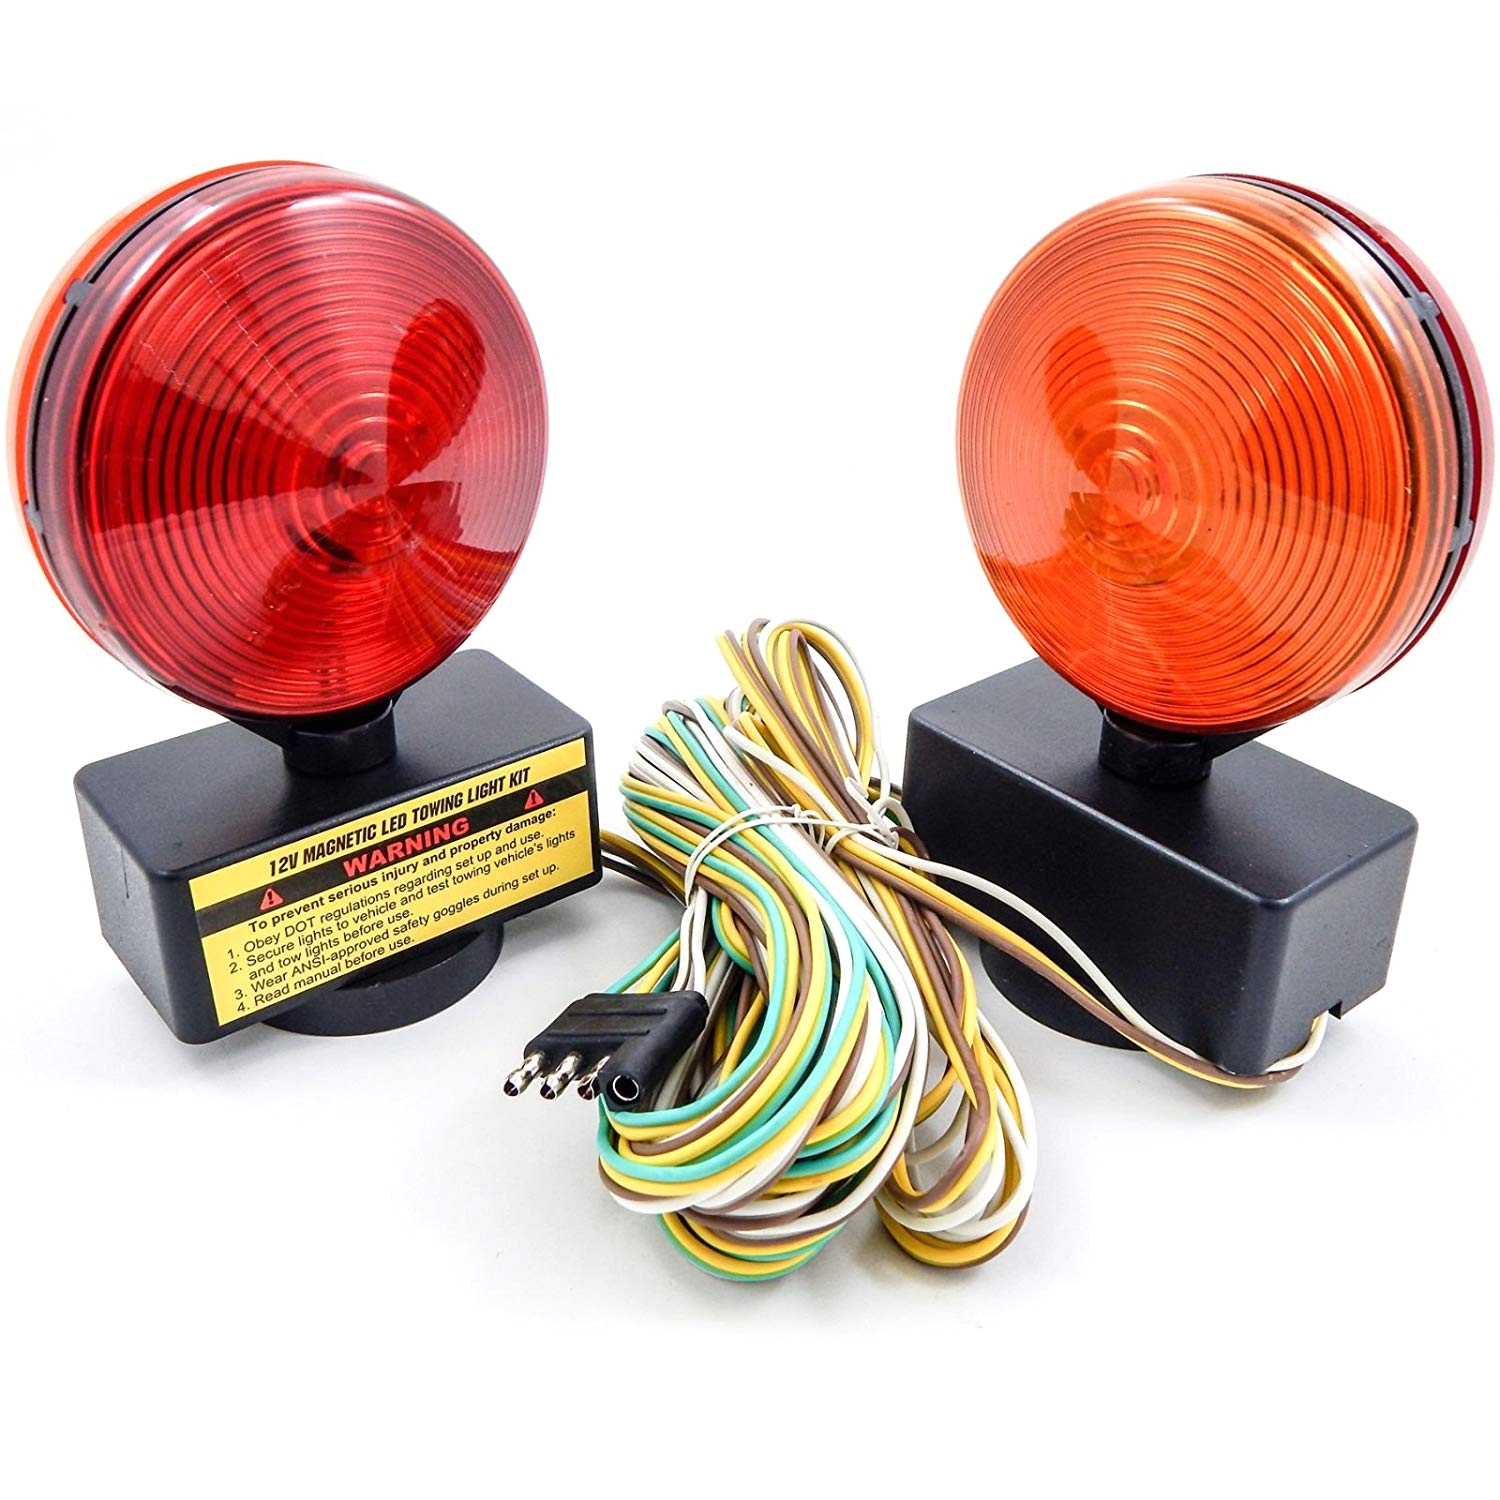 amazon com magnetic led trailer towing light kit magnet mount tow tail brake lights 12v 40 led wire harness automotive